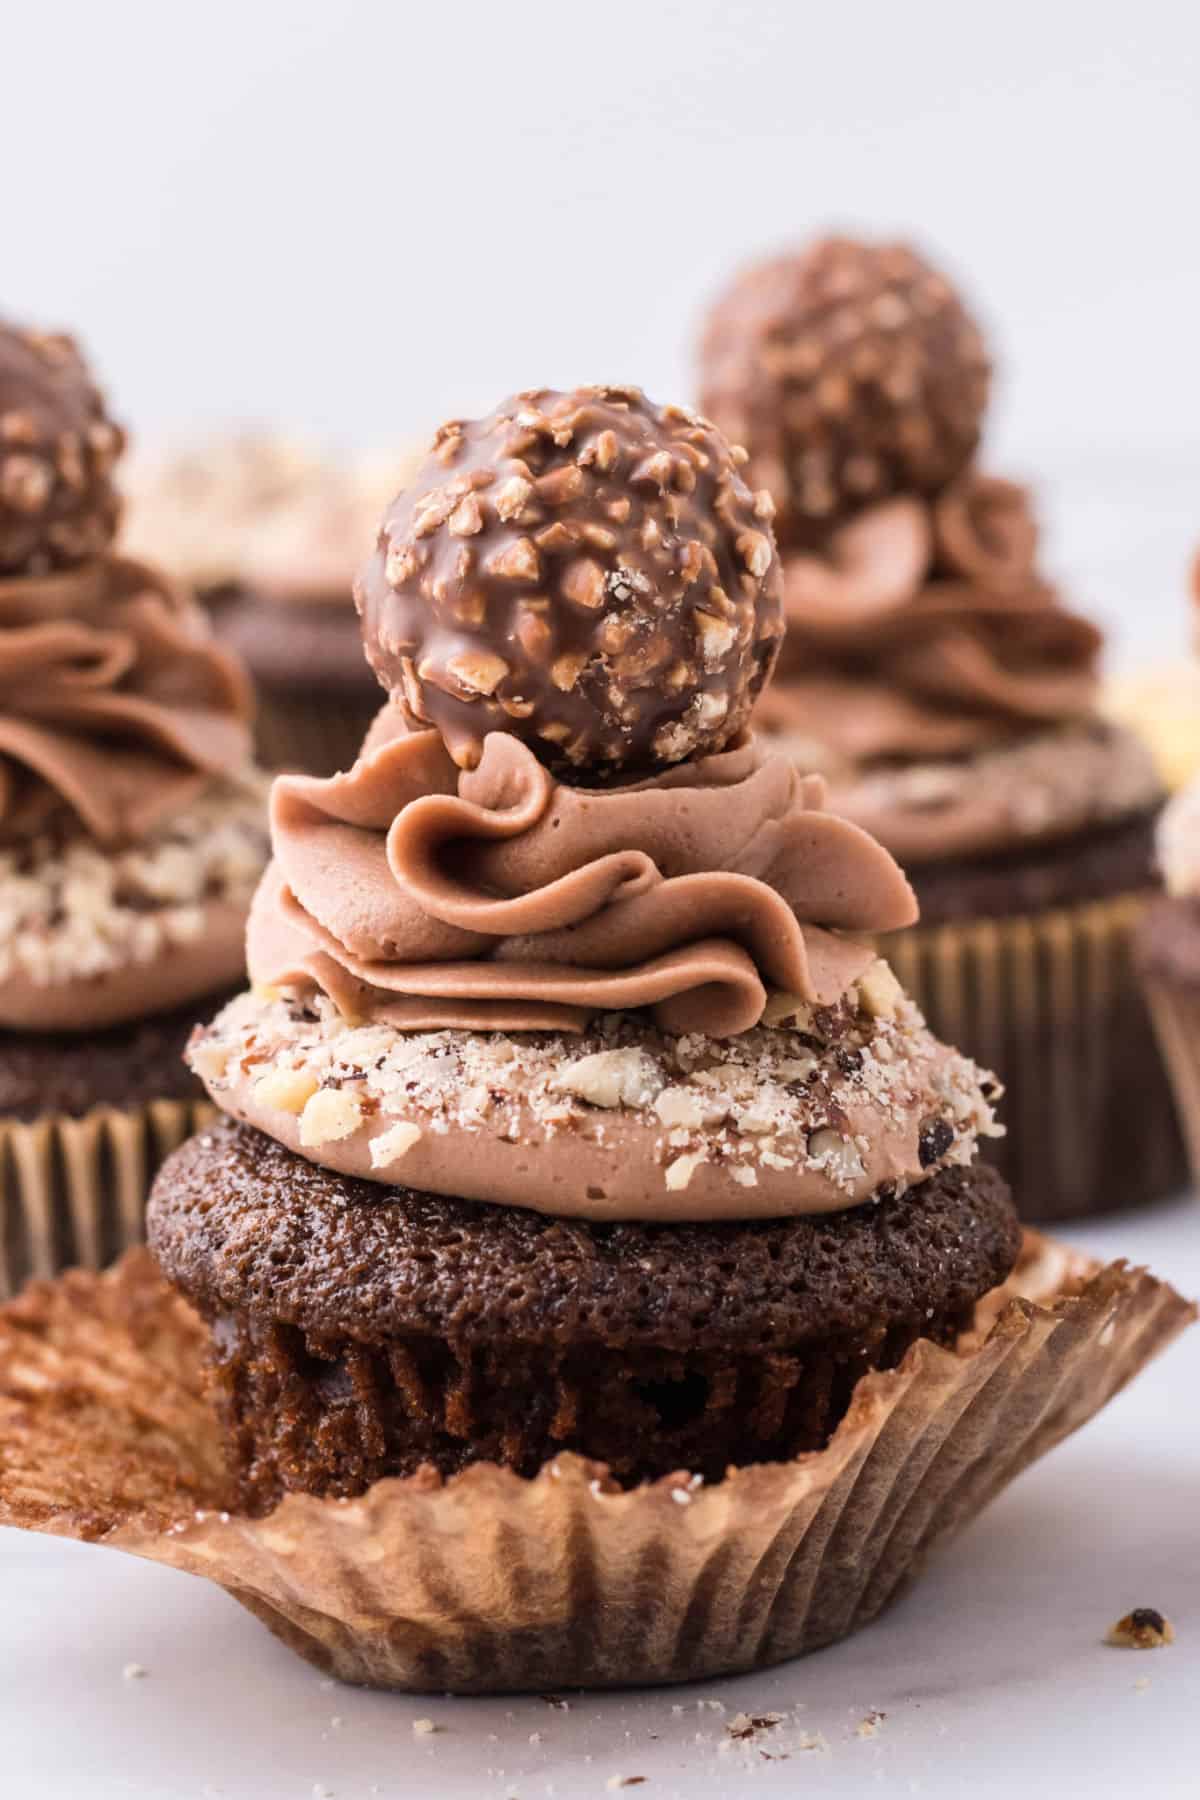 Unwrapped chocolate cupcake topped with hazelnuts, nutella buttercream, and a ferrero rocher chocolate.